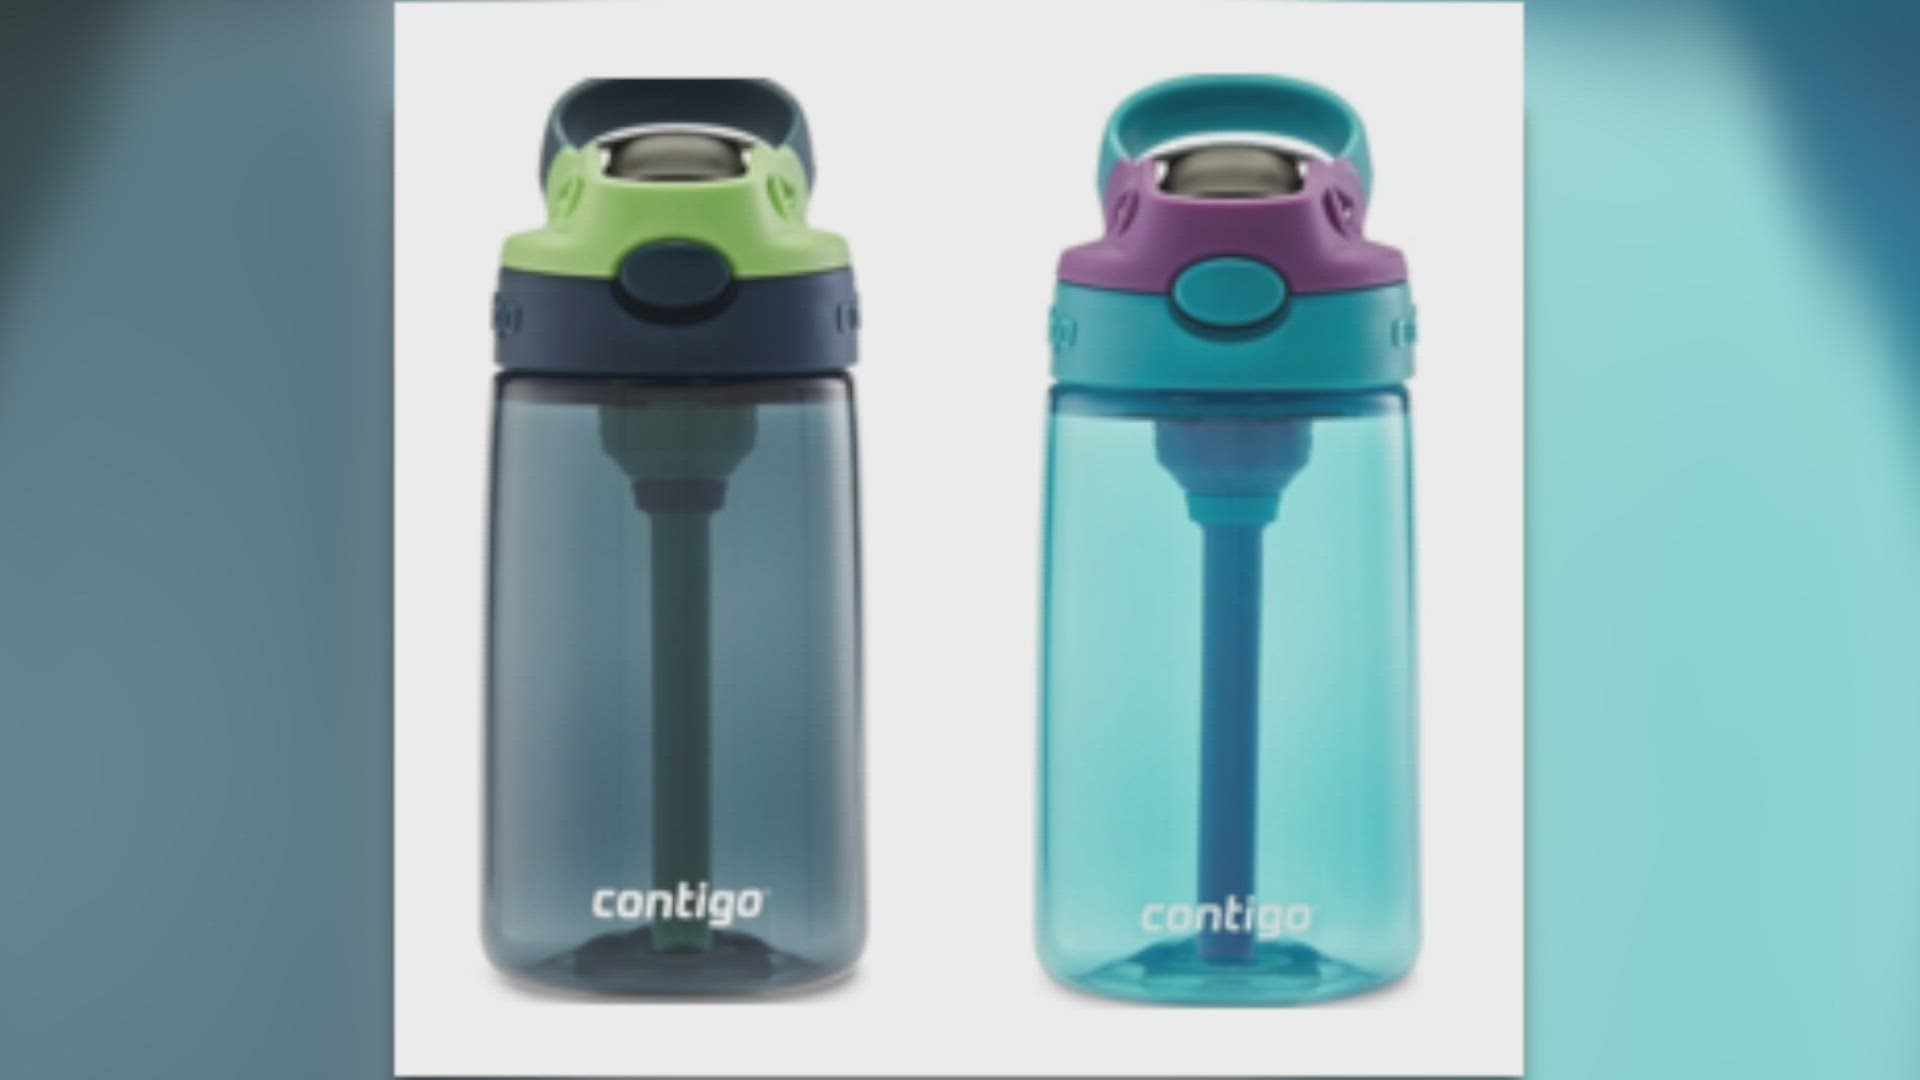 Water bottle manufacturer Contigo has announced it's recalling around 5.7 million replacement lids on kids' water bottles due to potential choking hazards. Veuer's Mercer Morrison has the story.